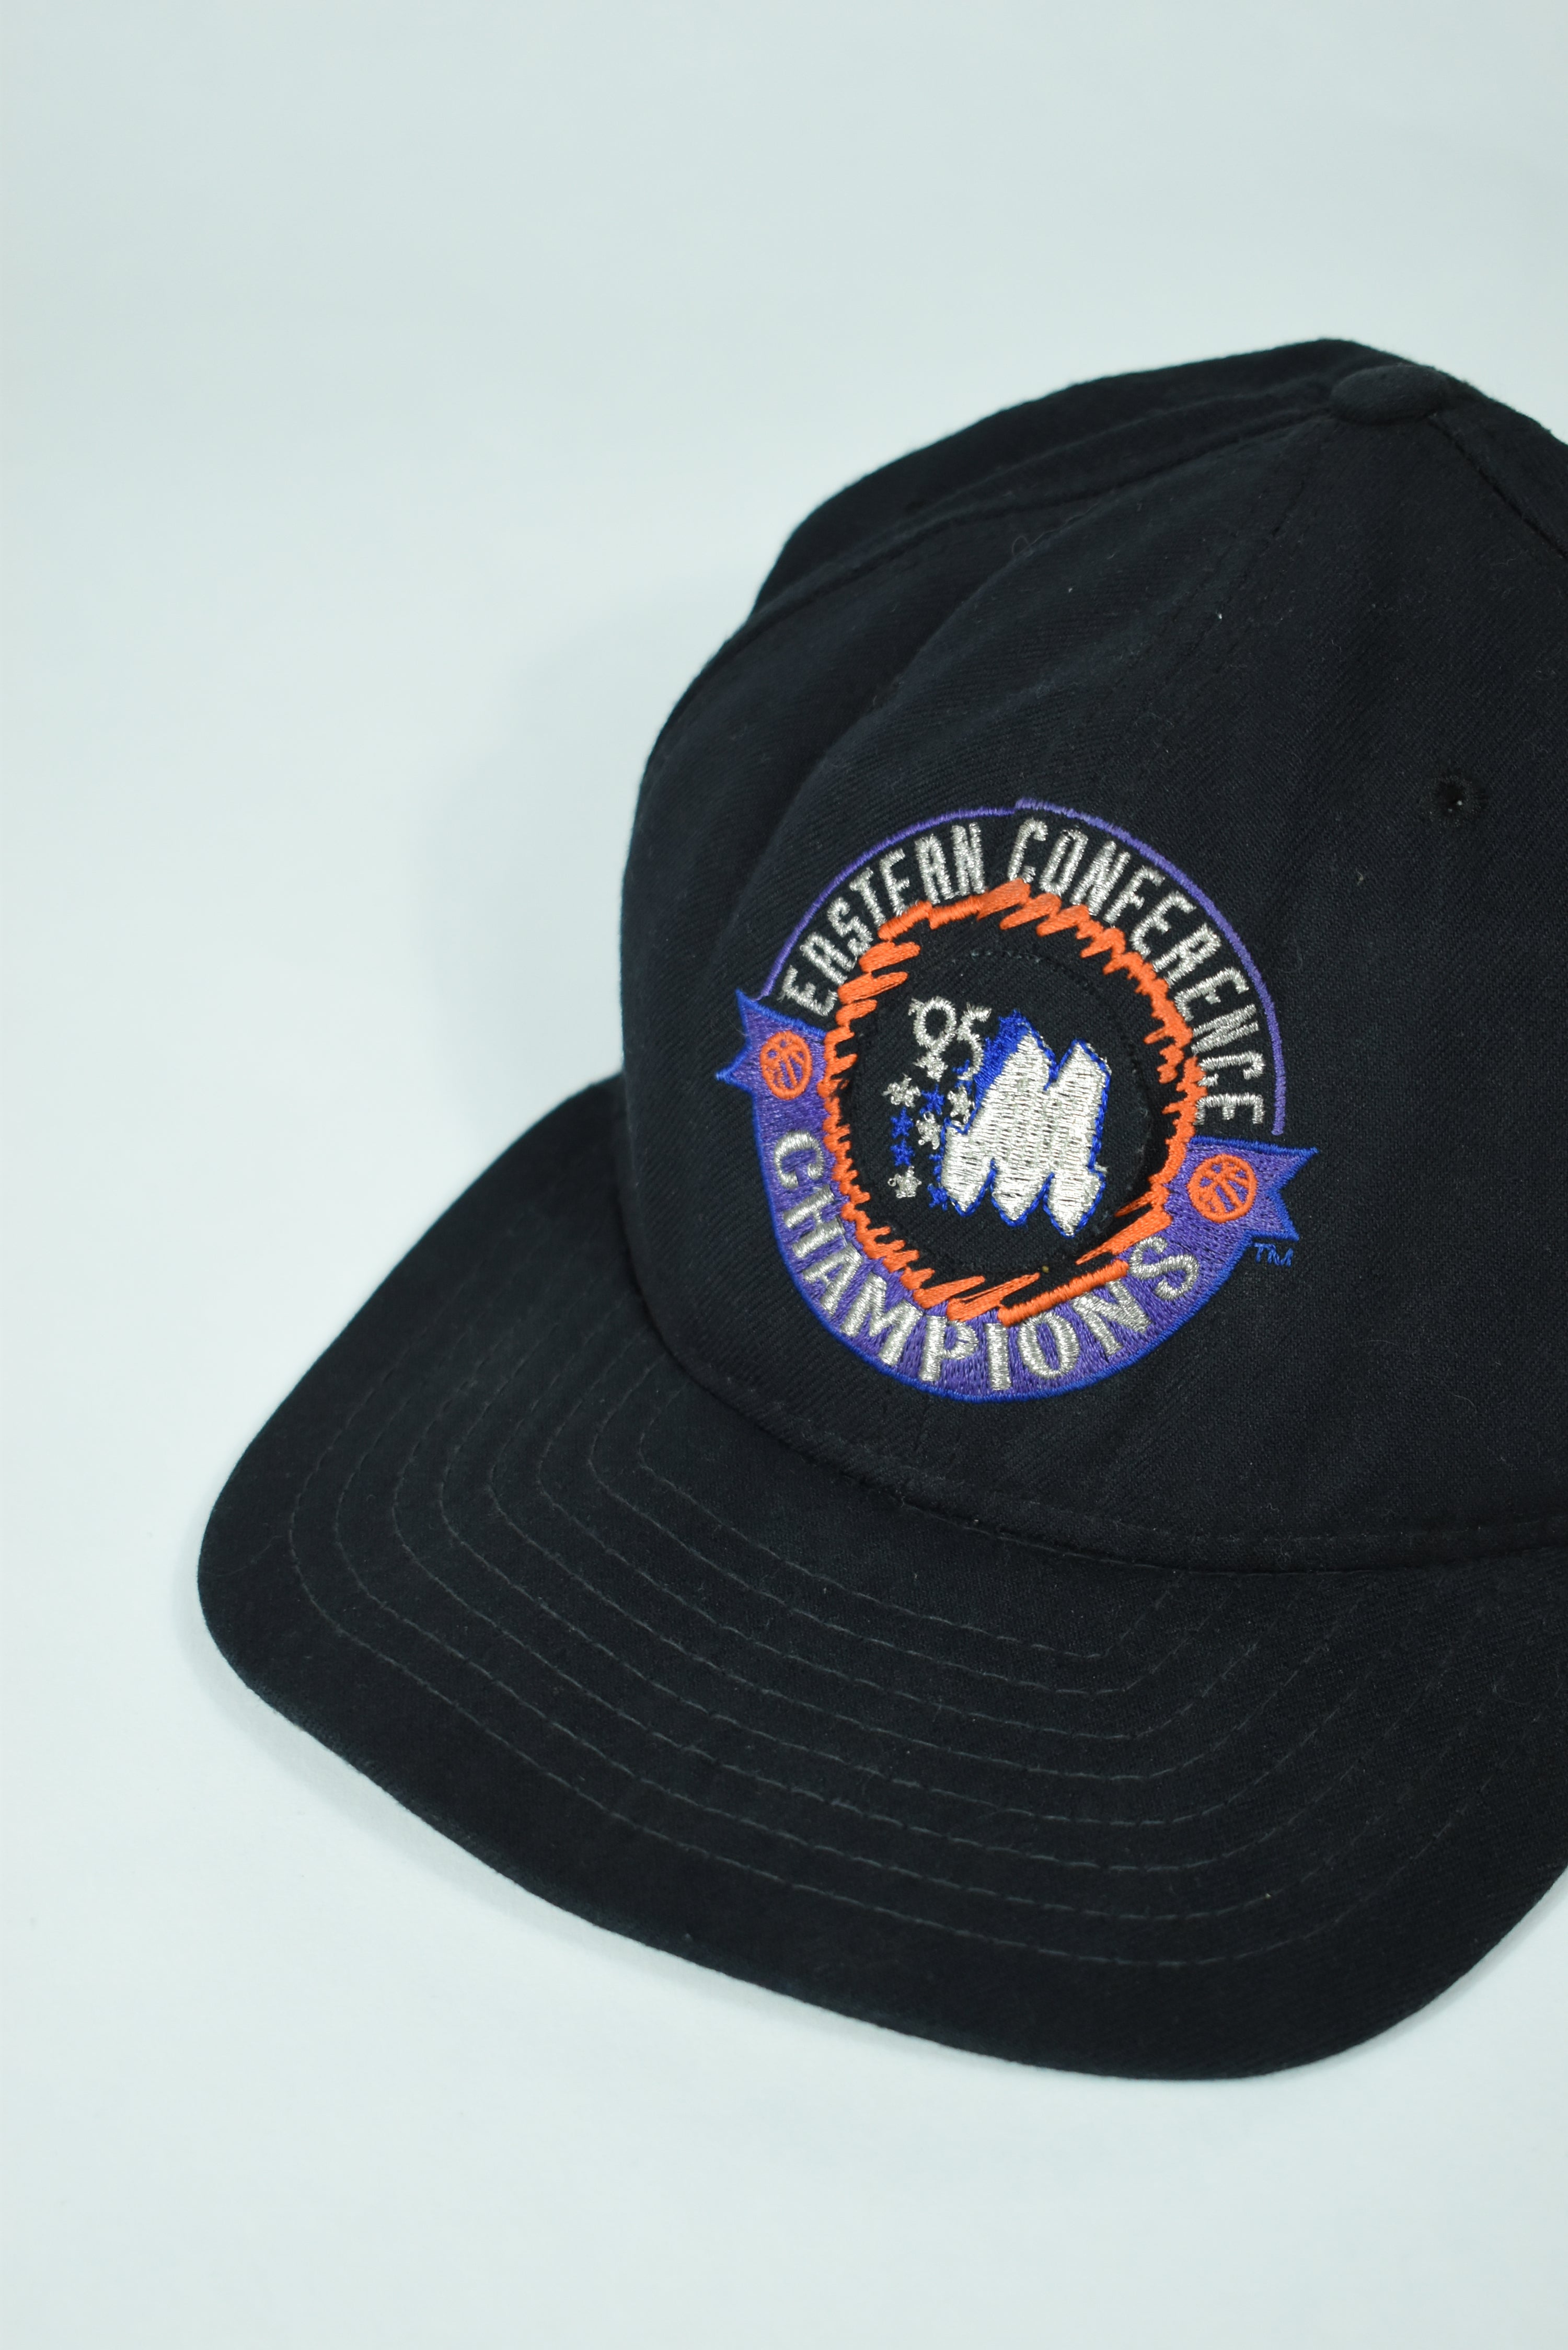 Vintage Magic 95 East Conference Champions Hat